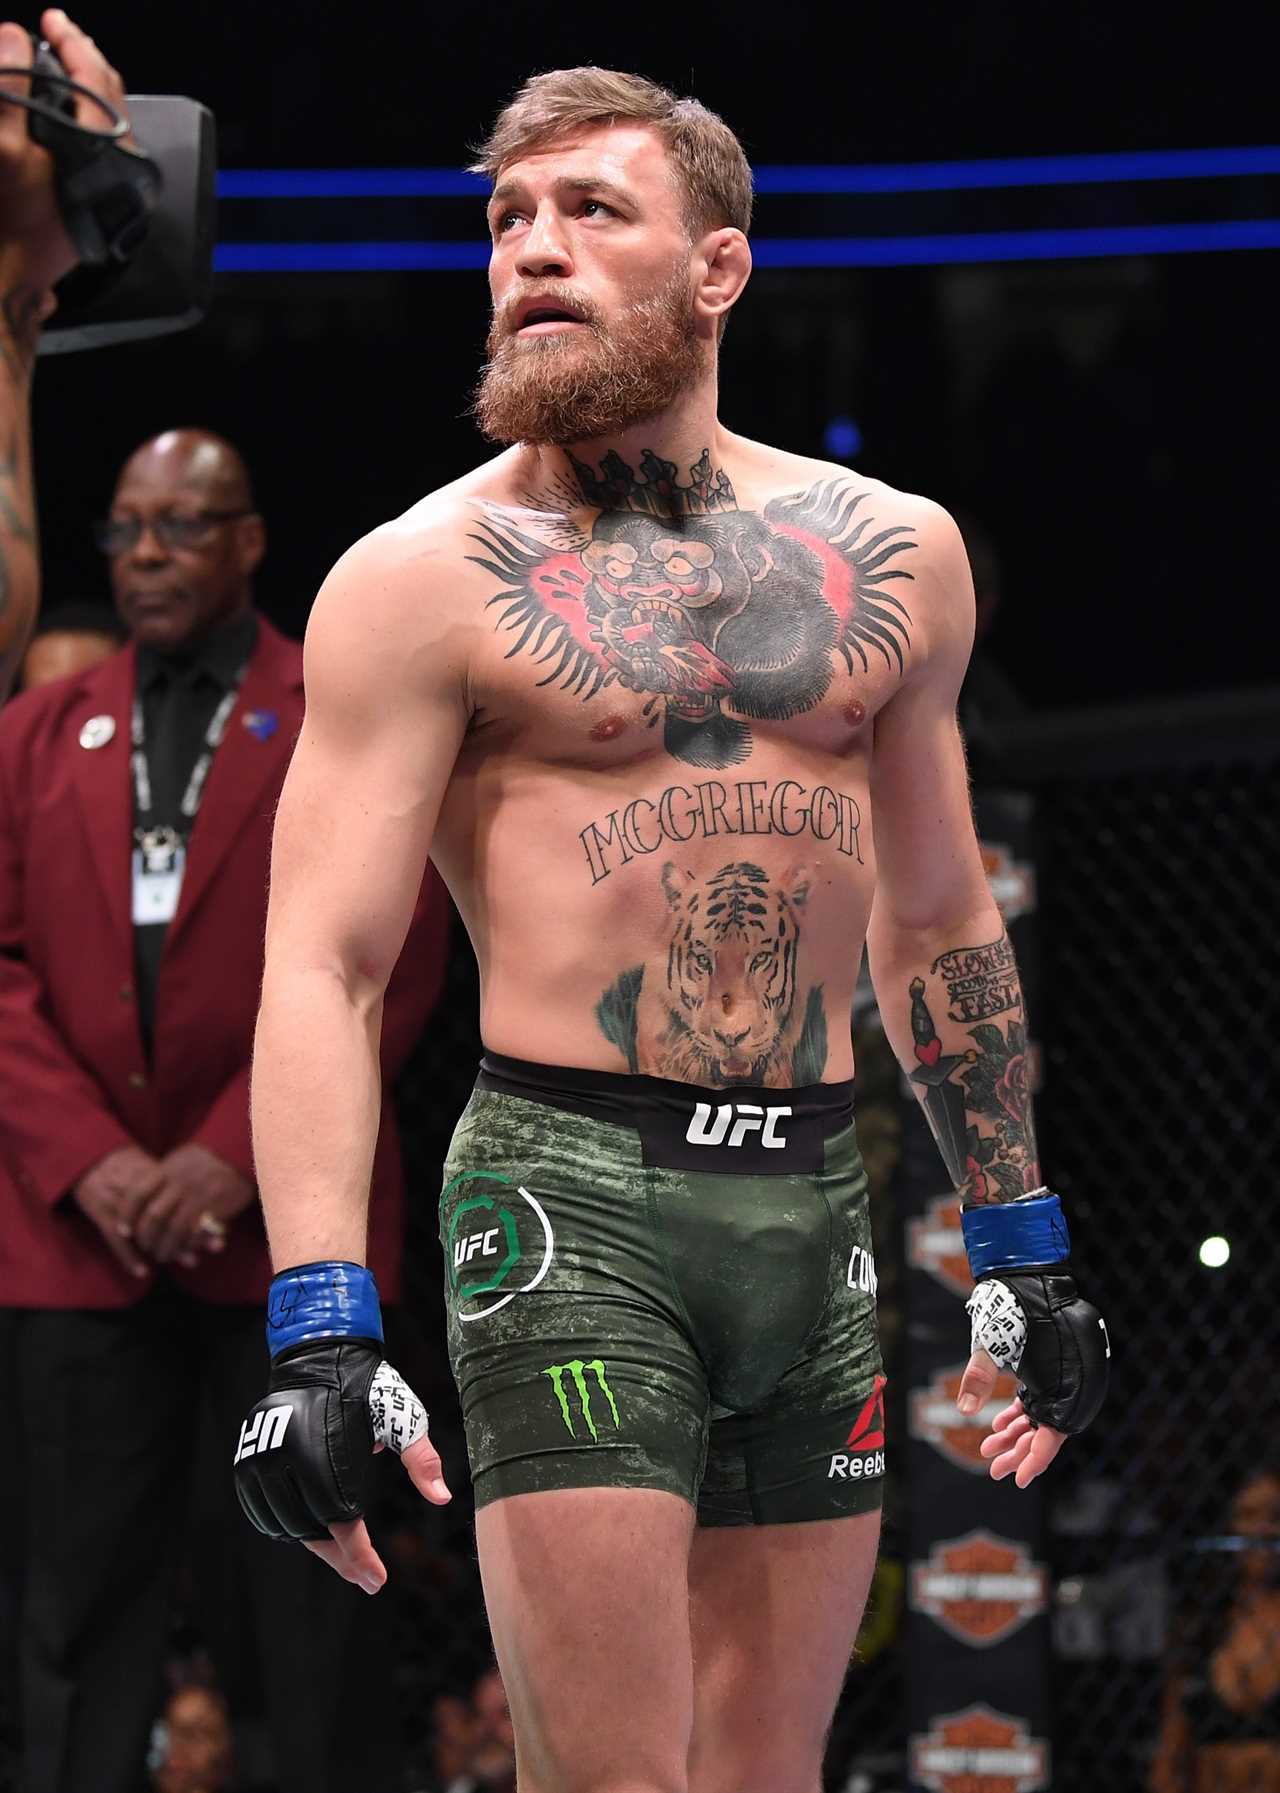 Conor McGregor dominates the PPV rankings in this incredible table